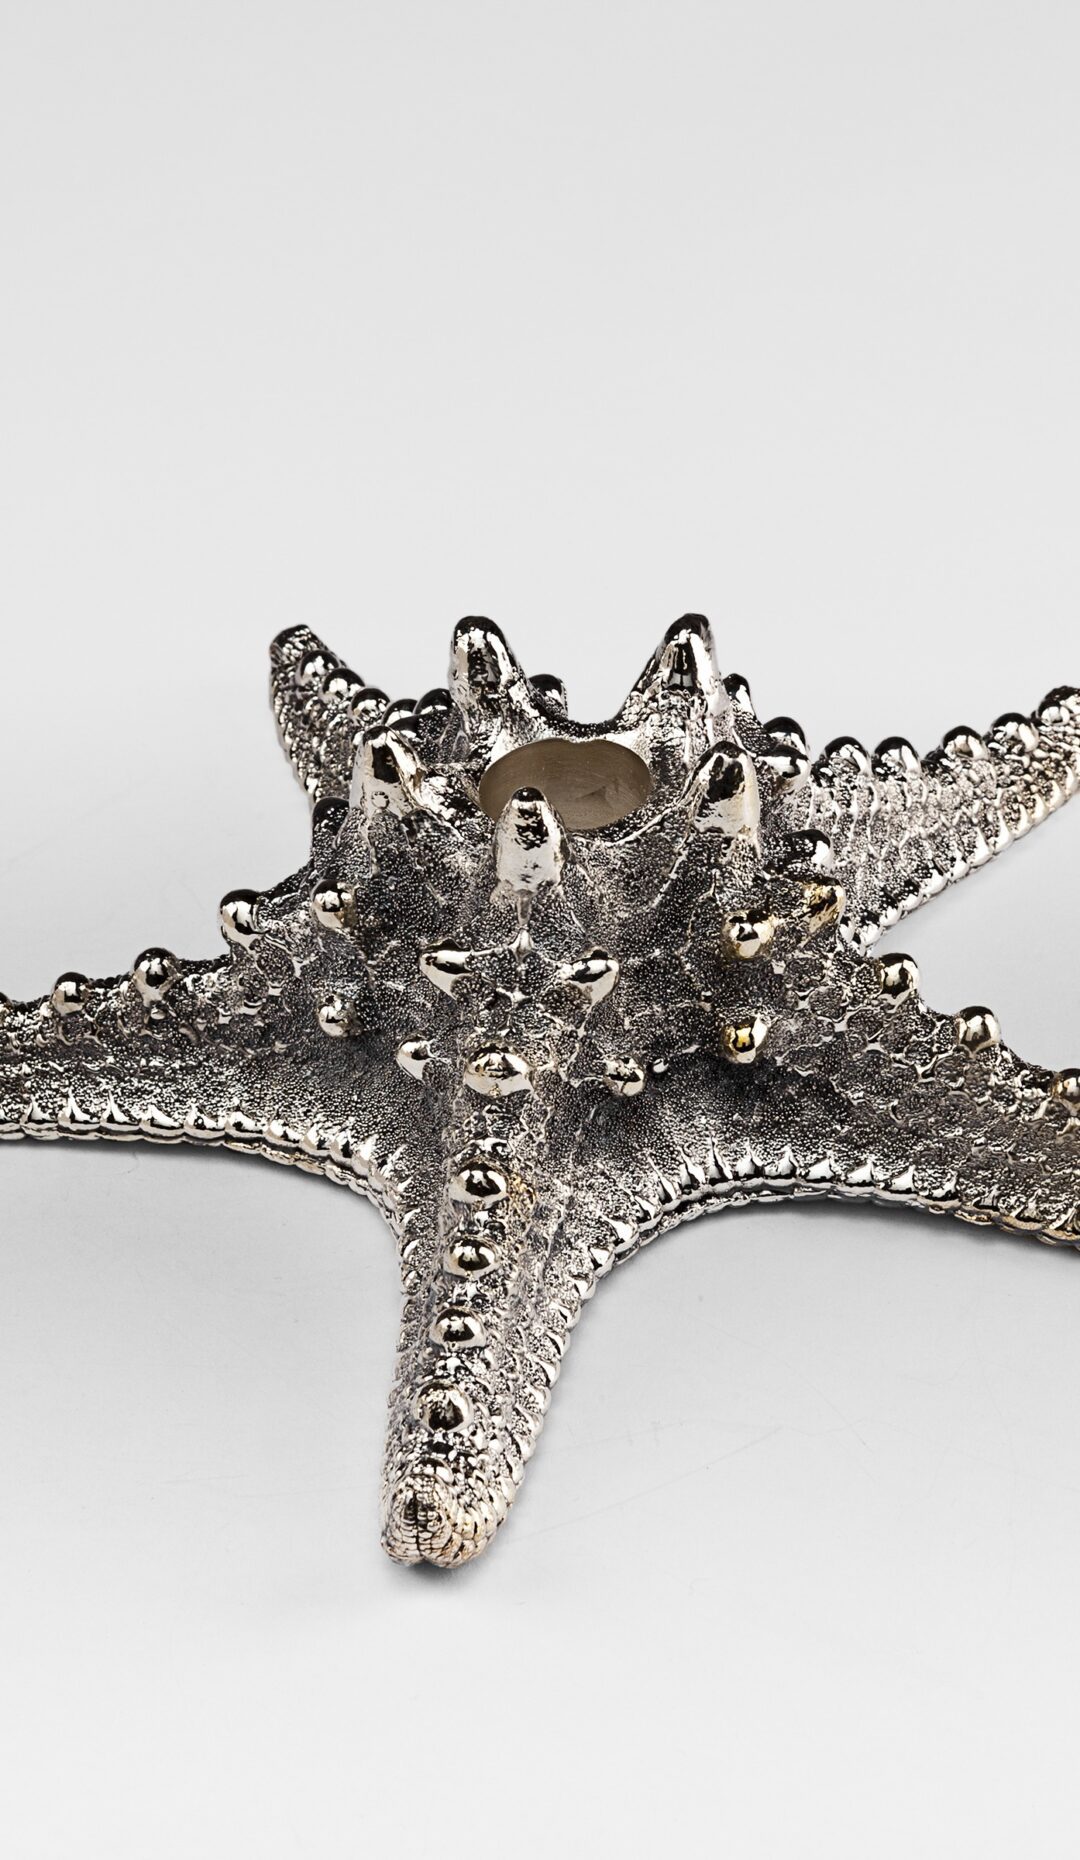 Silver Plated Star Fish